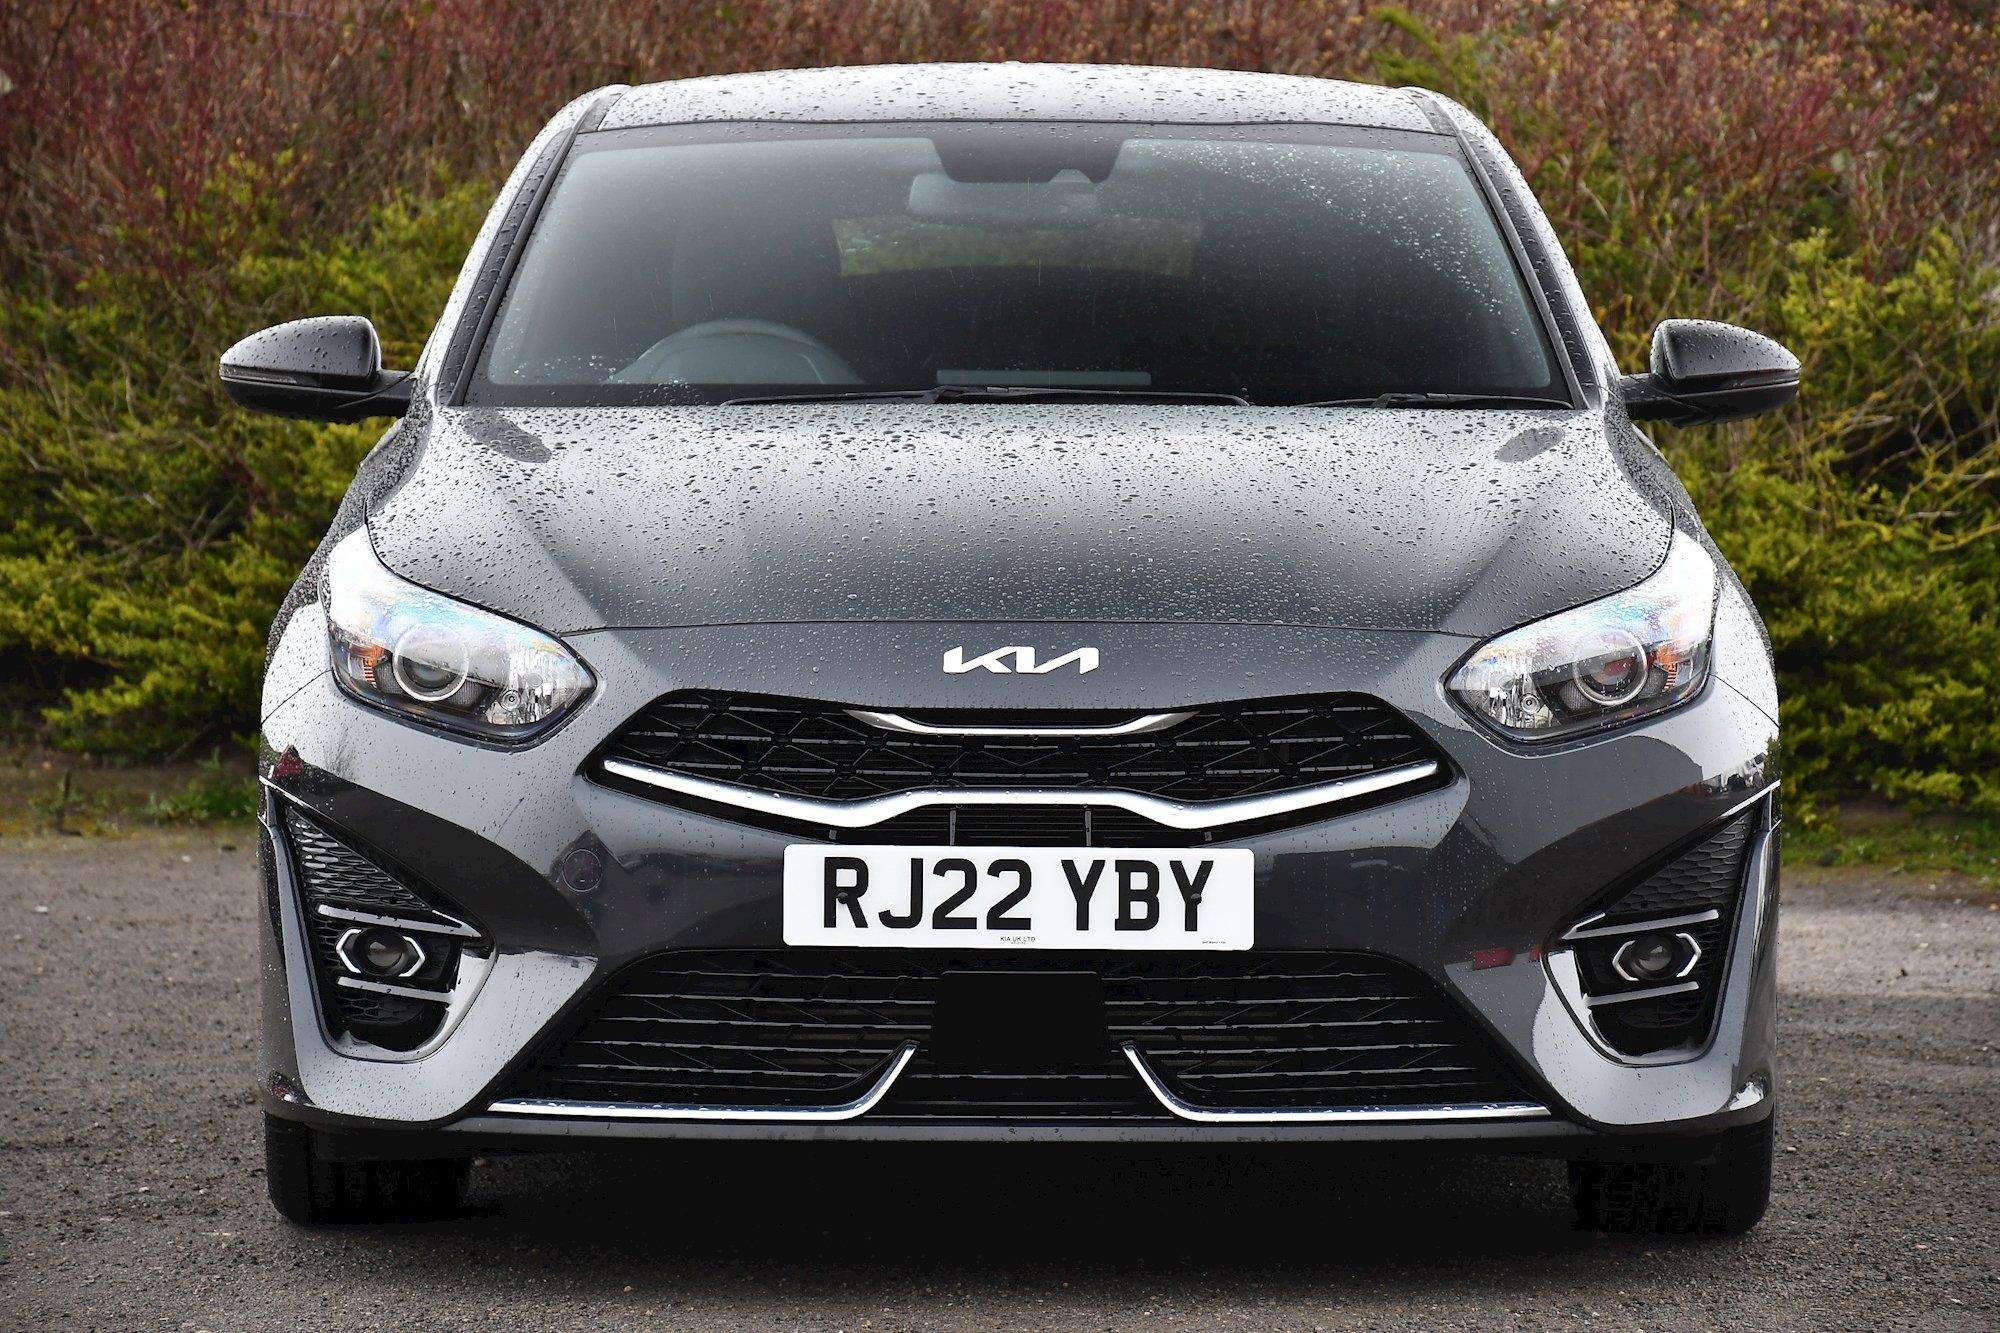 Kia ProCeed GT-Line 1.5 Petrol Manual review – Shooting brake lets you  proceed with confidence - Daily Record